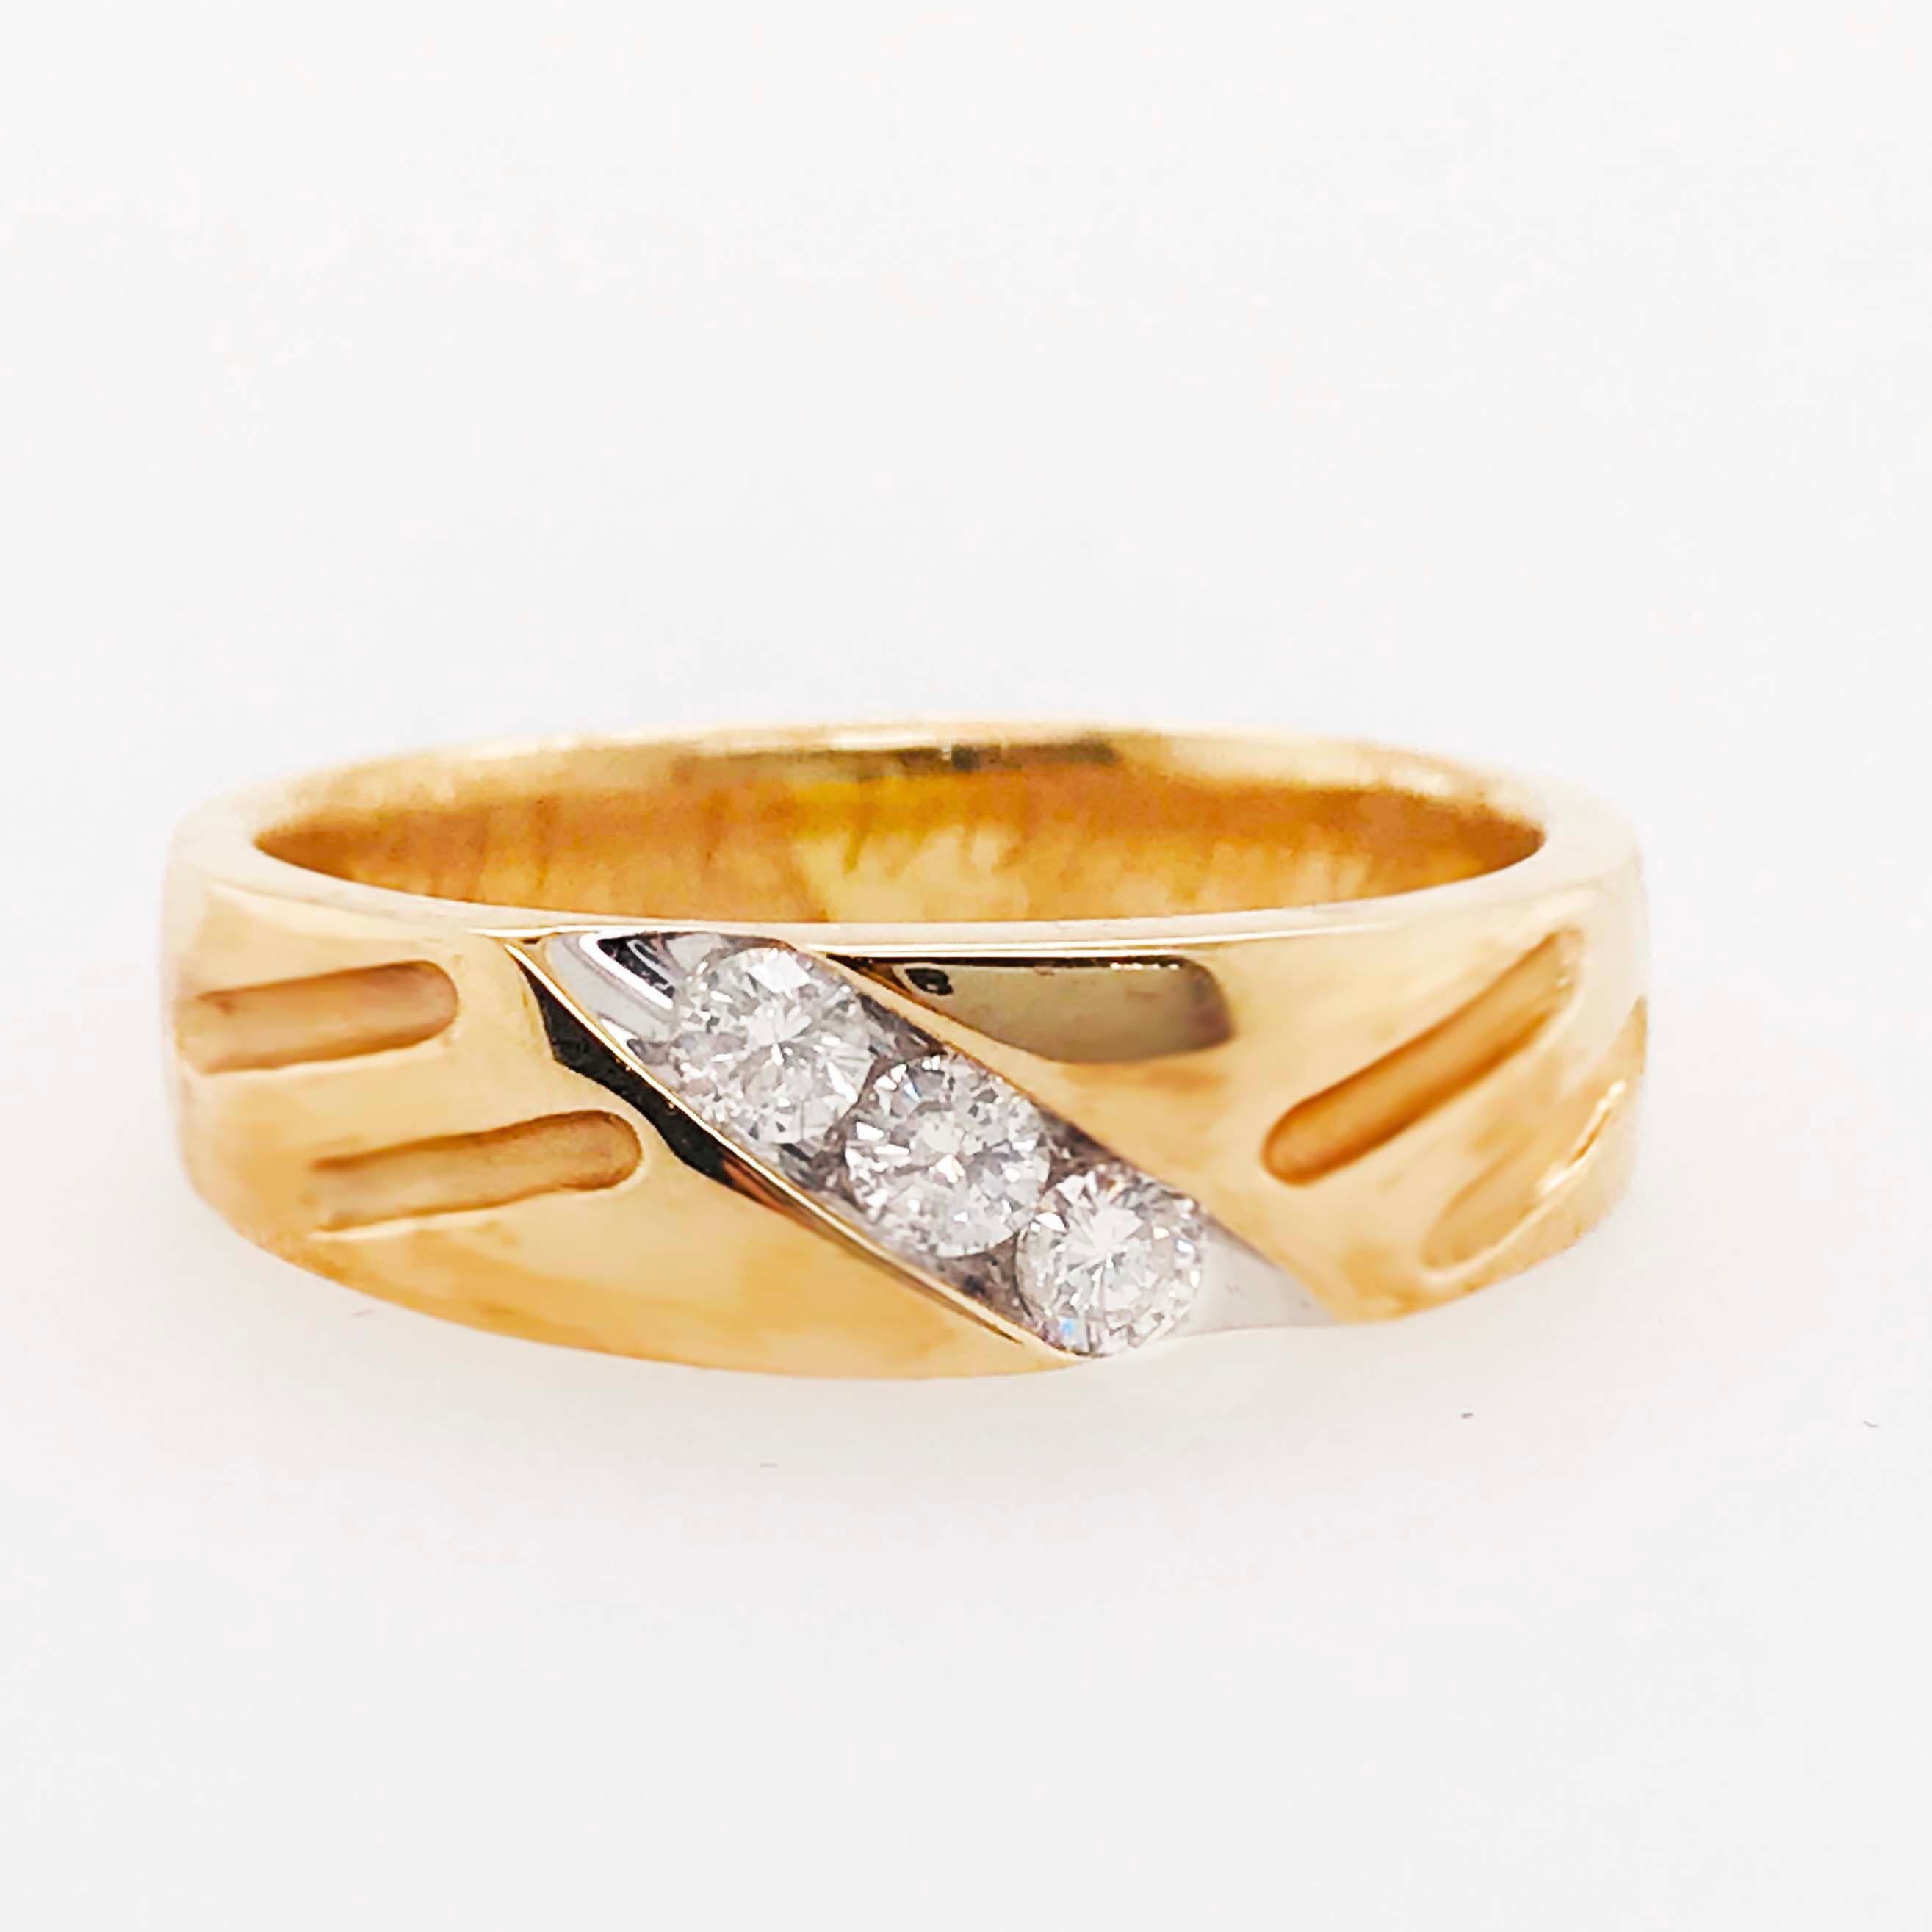 This special diamond band is a custom diamond wedding band that was cherished and adored. In 2019 Abigail lost her beloved husband after their 55 year marriage. They both adored fine jewelry and believed in tradition. They created this custom